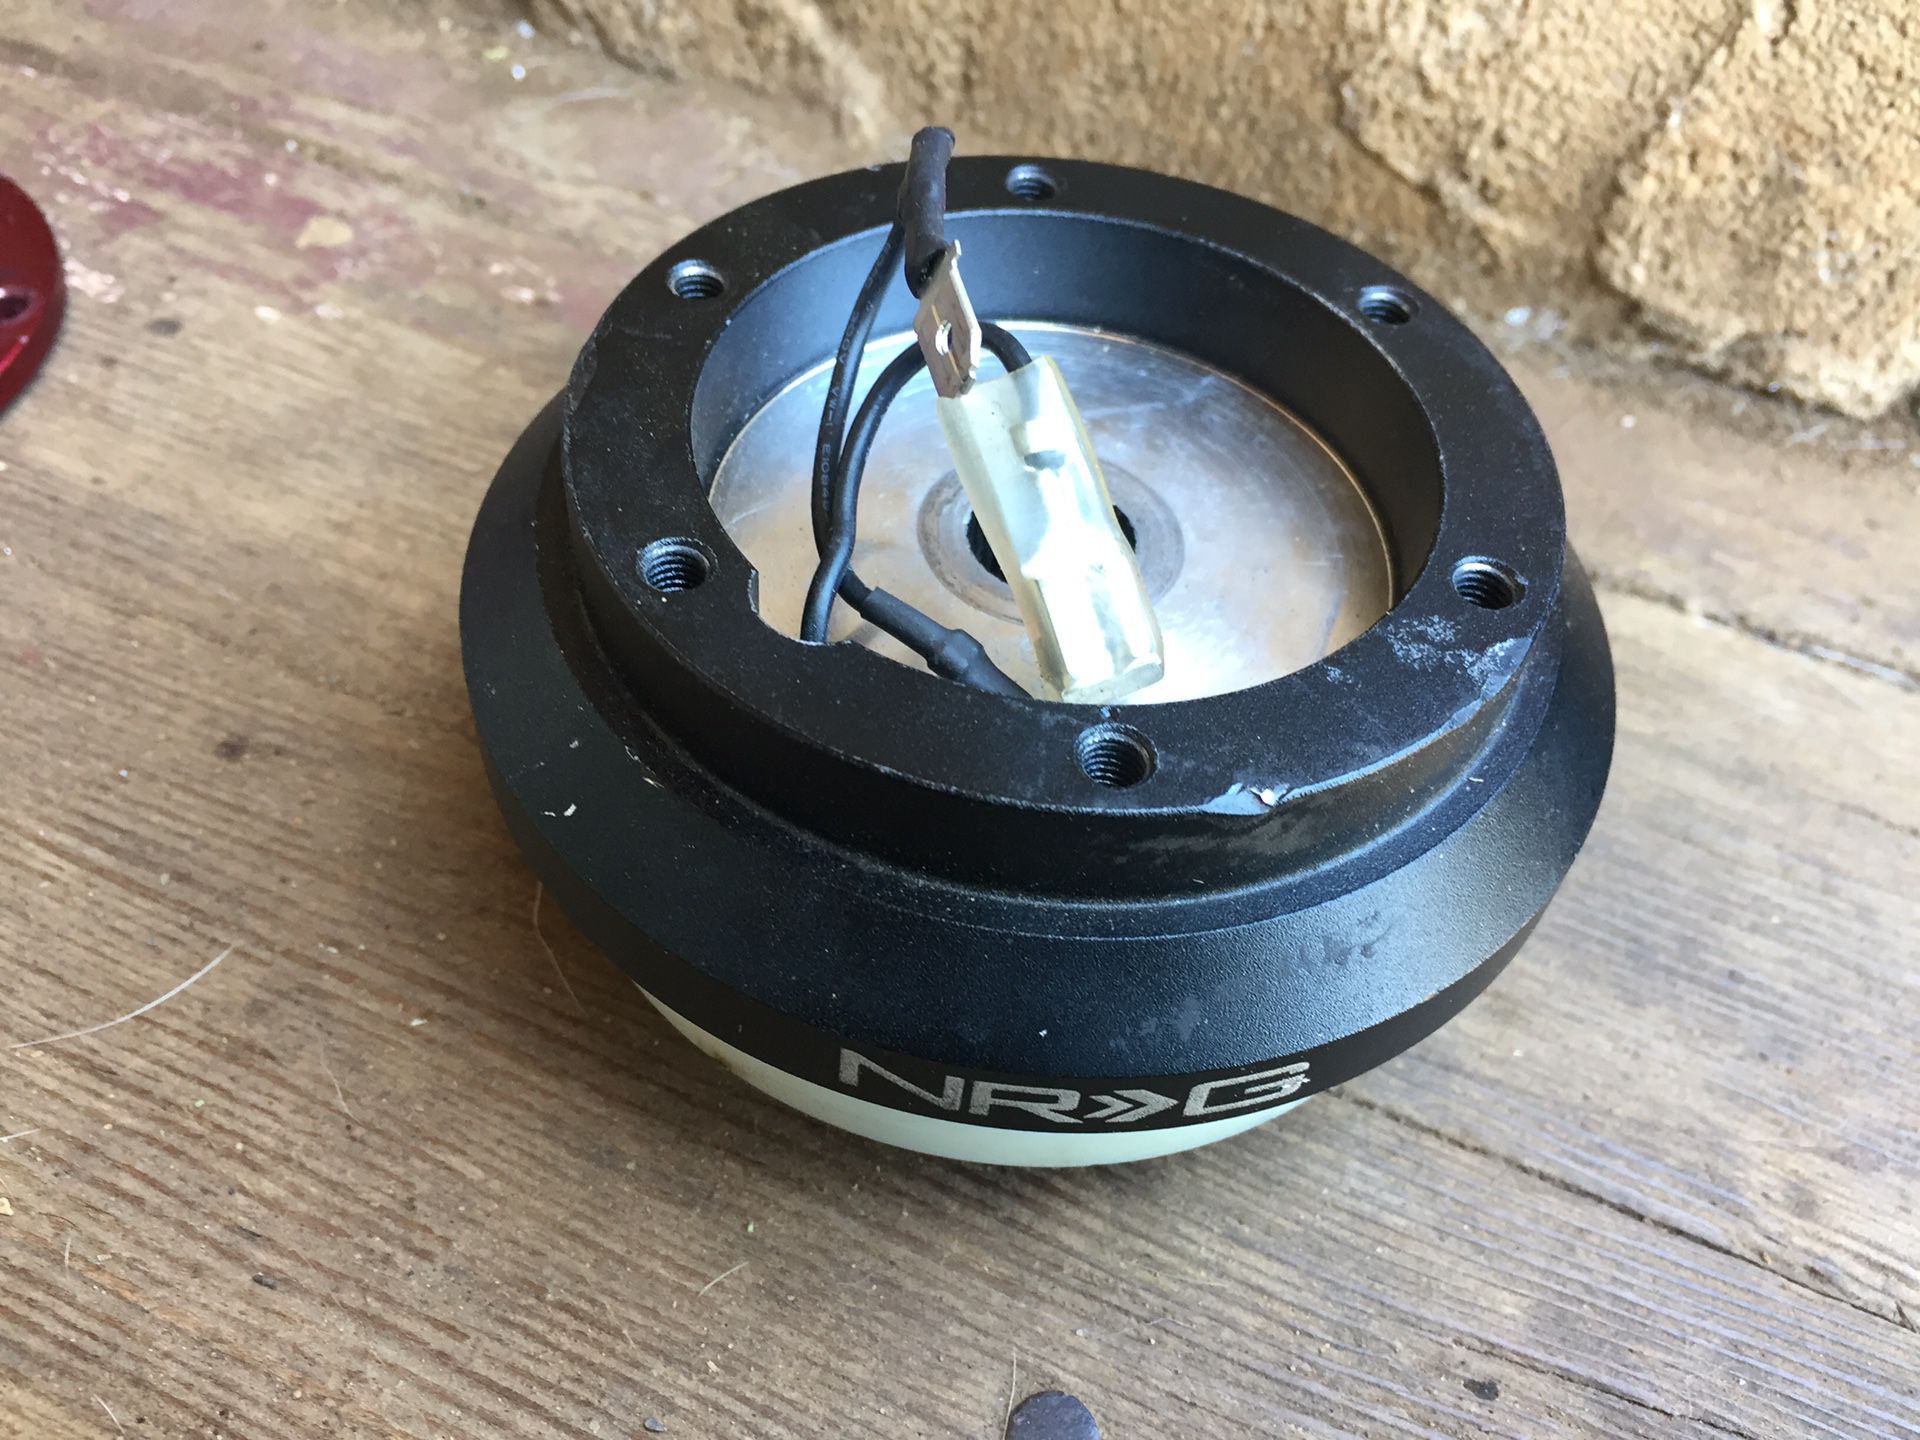 Nrg short hub and male end quick release Civic Acura integra